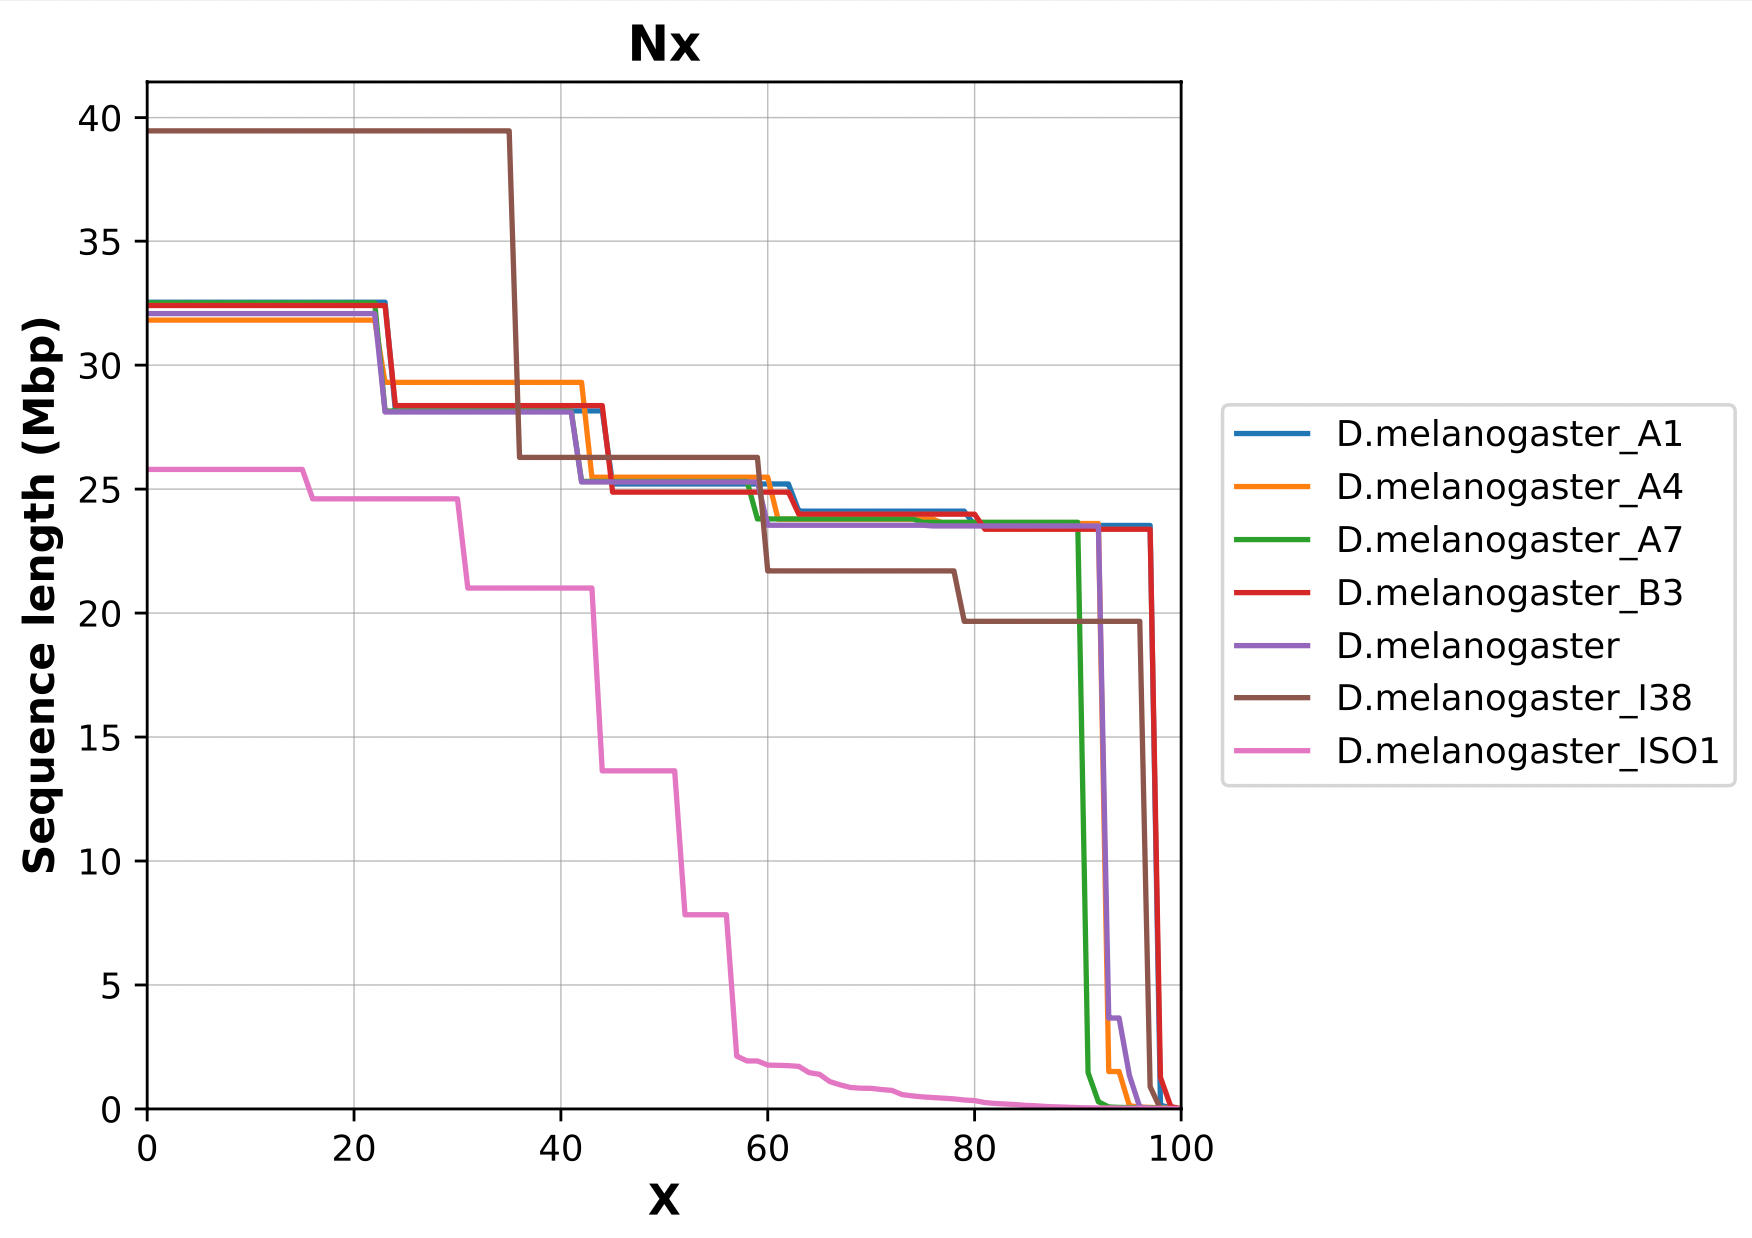 Example of Nx graph for Drosophila assemblies